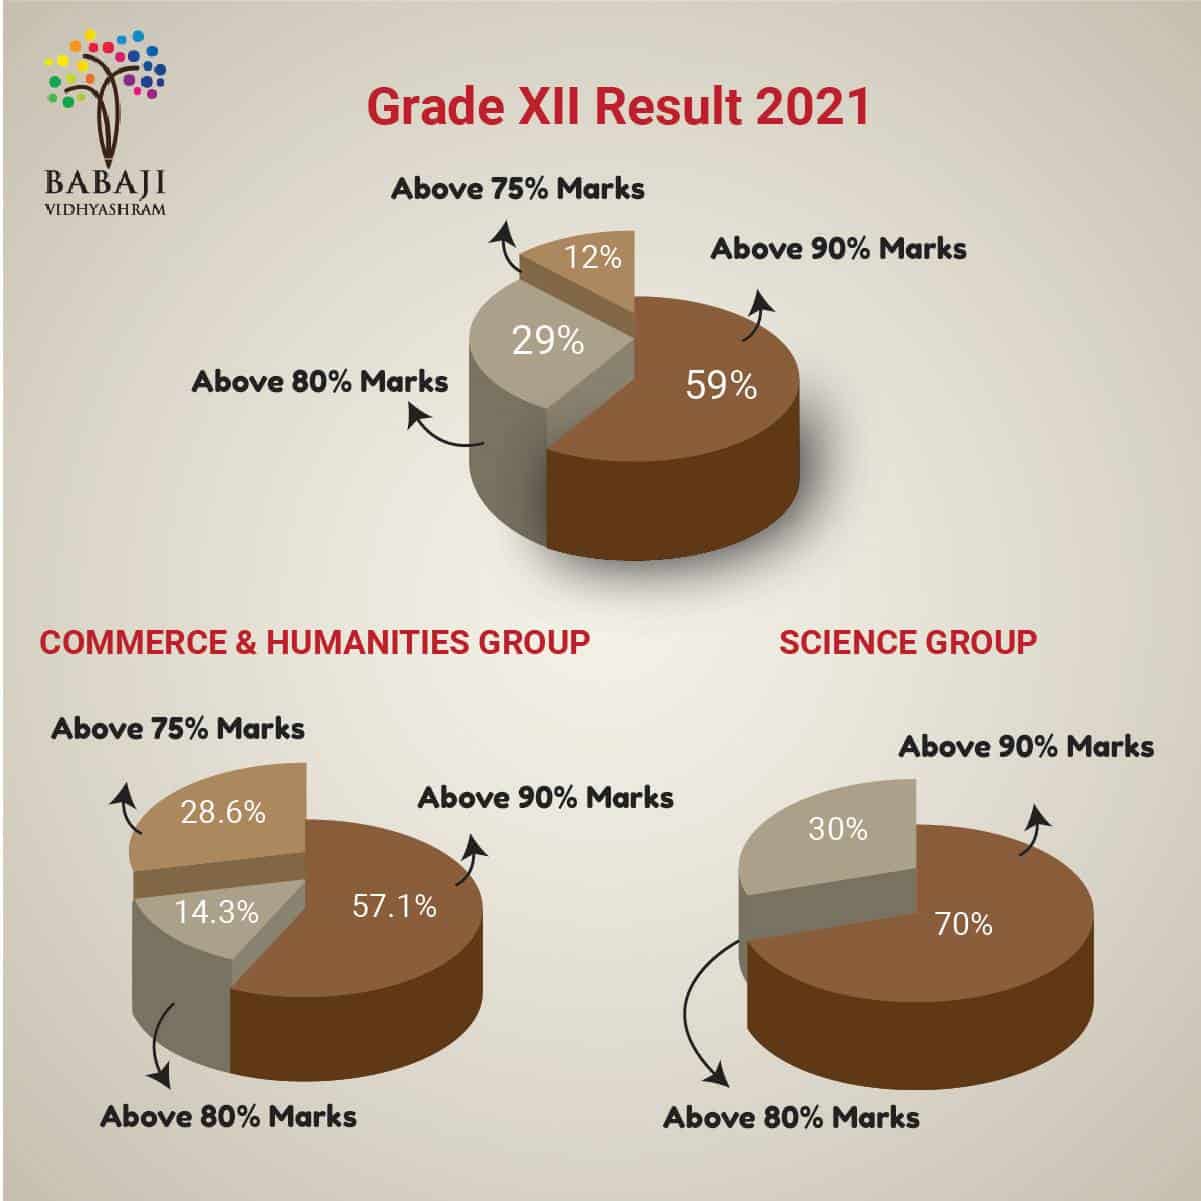 infographics to explain 2021 grade 12 results of Babaji Vidyashram with all students - 59% scoring above 90%, 29% scoring above 80% and 12%, above 70% in 3D pie chart placed centre top, 70% of Science group children scoring above 90% and 30% scoring above 80%, pie chart placed bottom right , 57.1% of Commerce group gaining above 90%, 14.3% in 80% mark range and the rest in 28.6% range piechart placed bottom left.